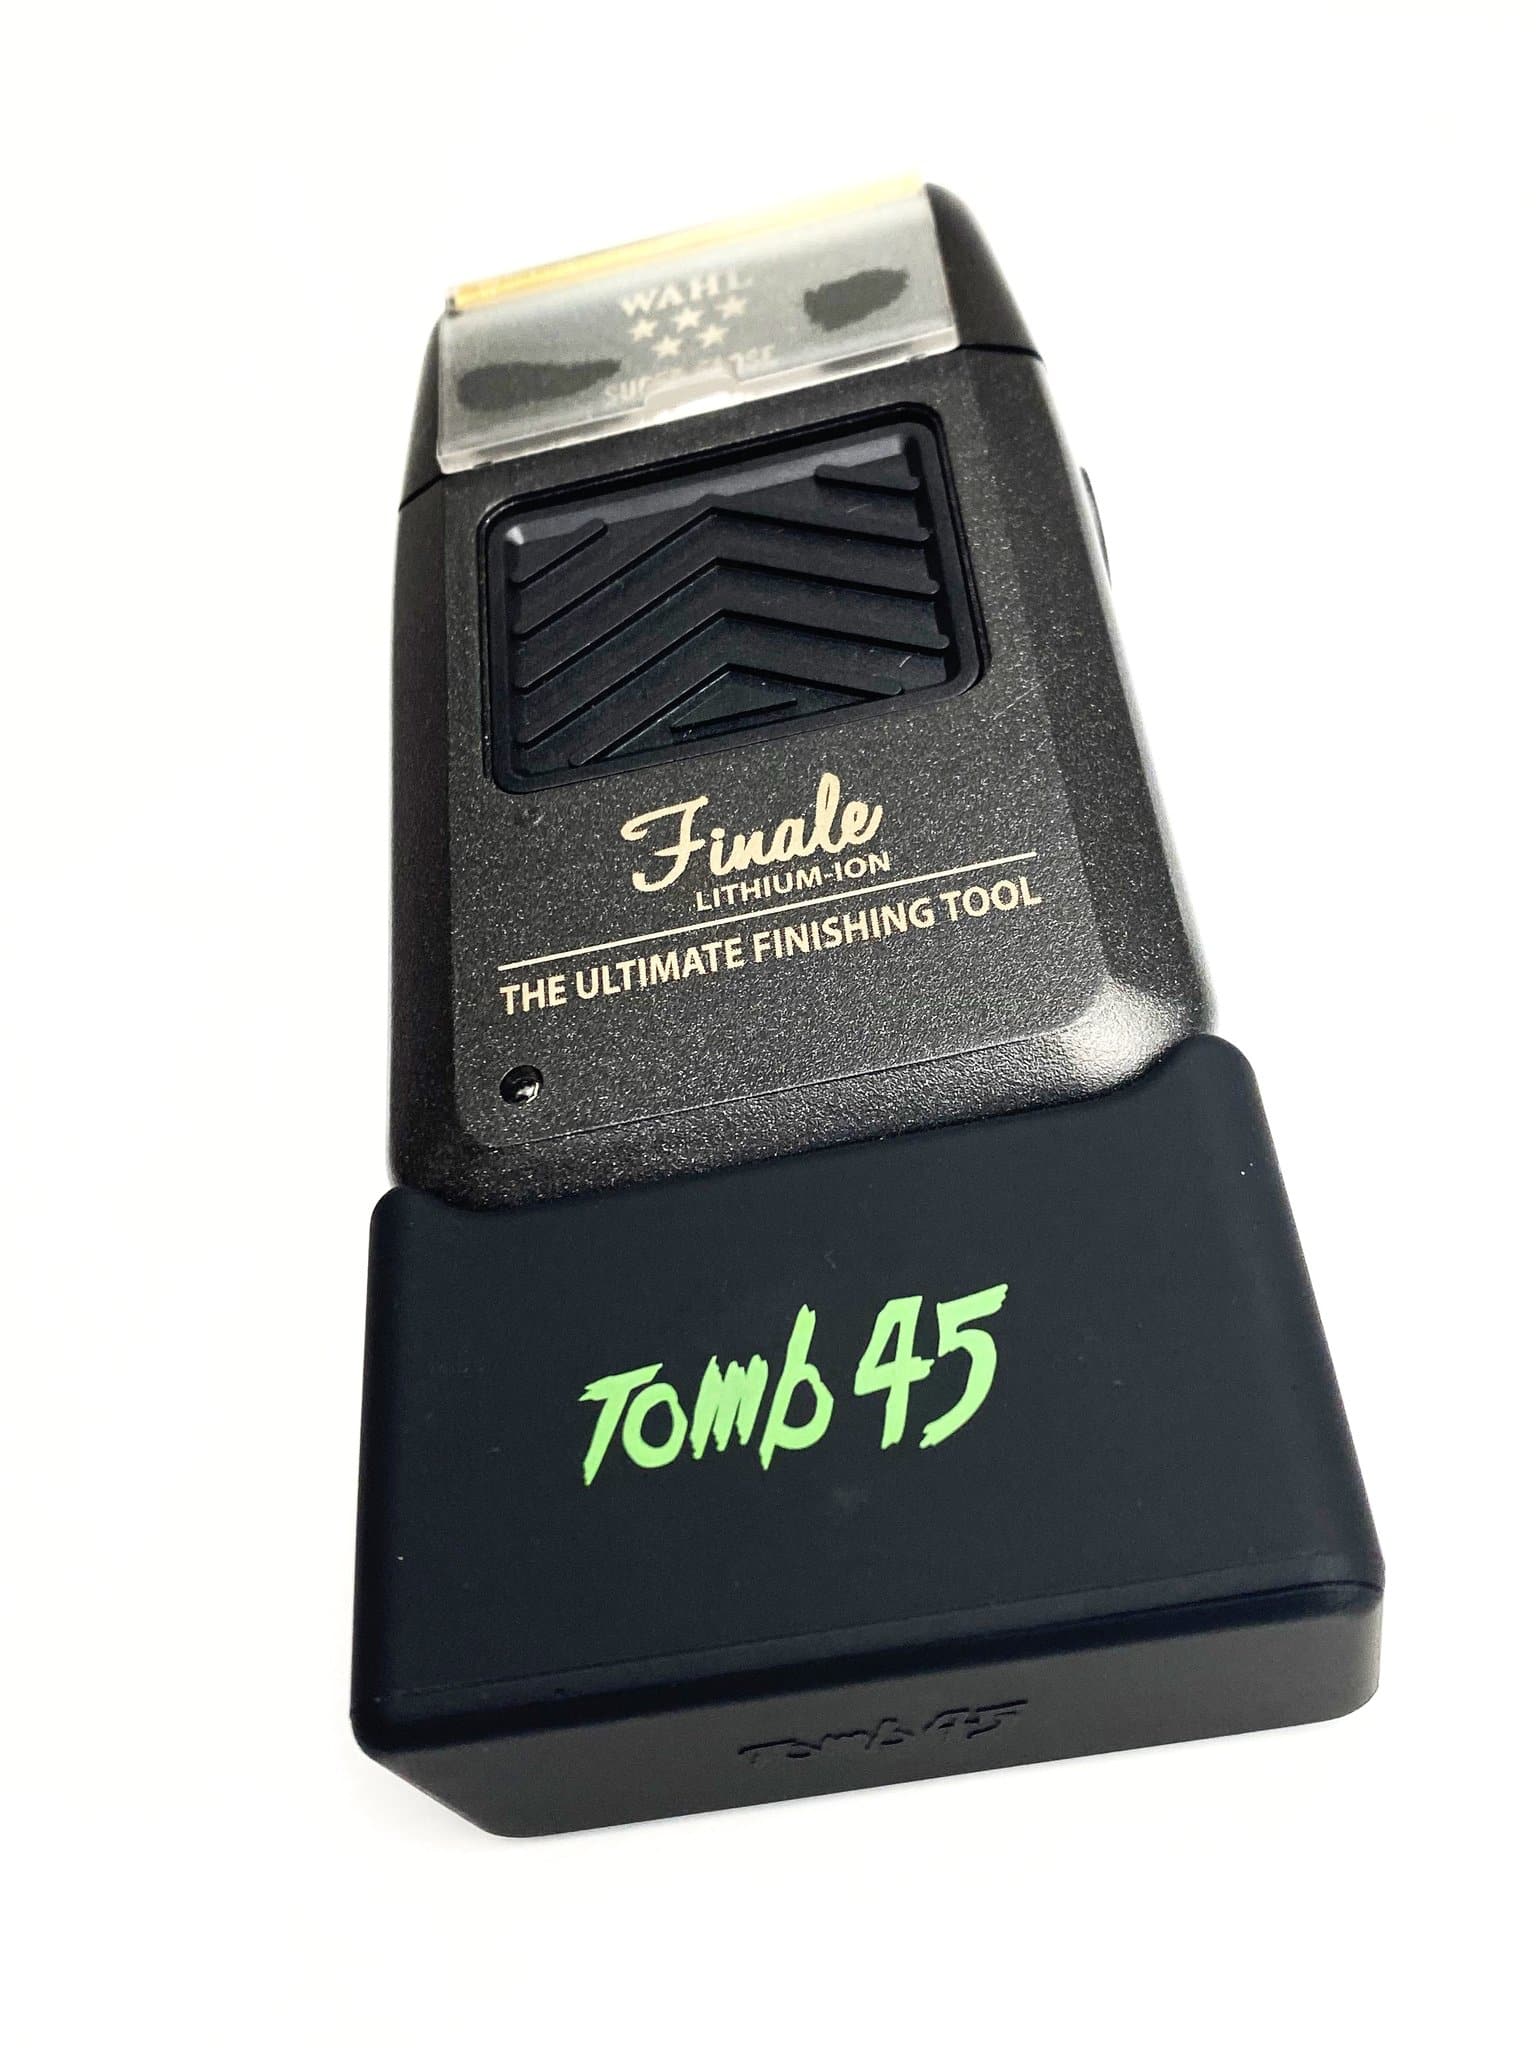 Tomb 45 Power Clip Wahl Finale Shaver - Goldy TV